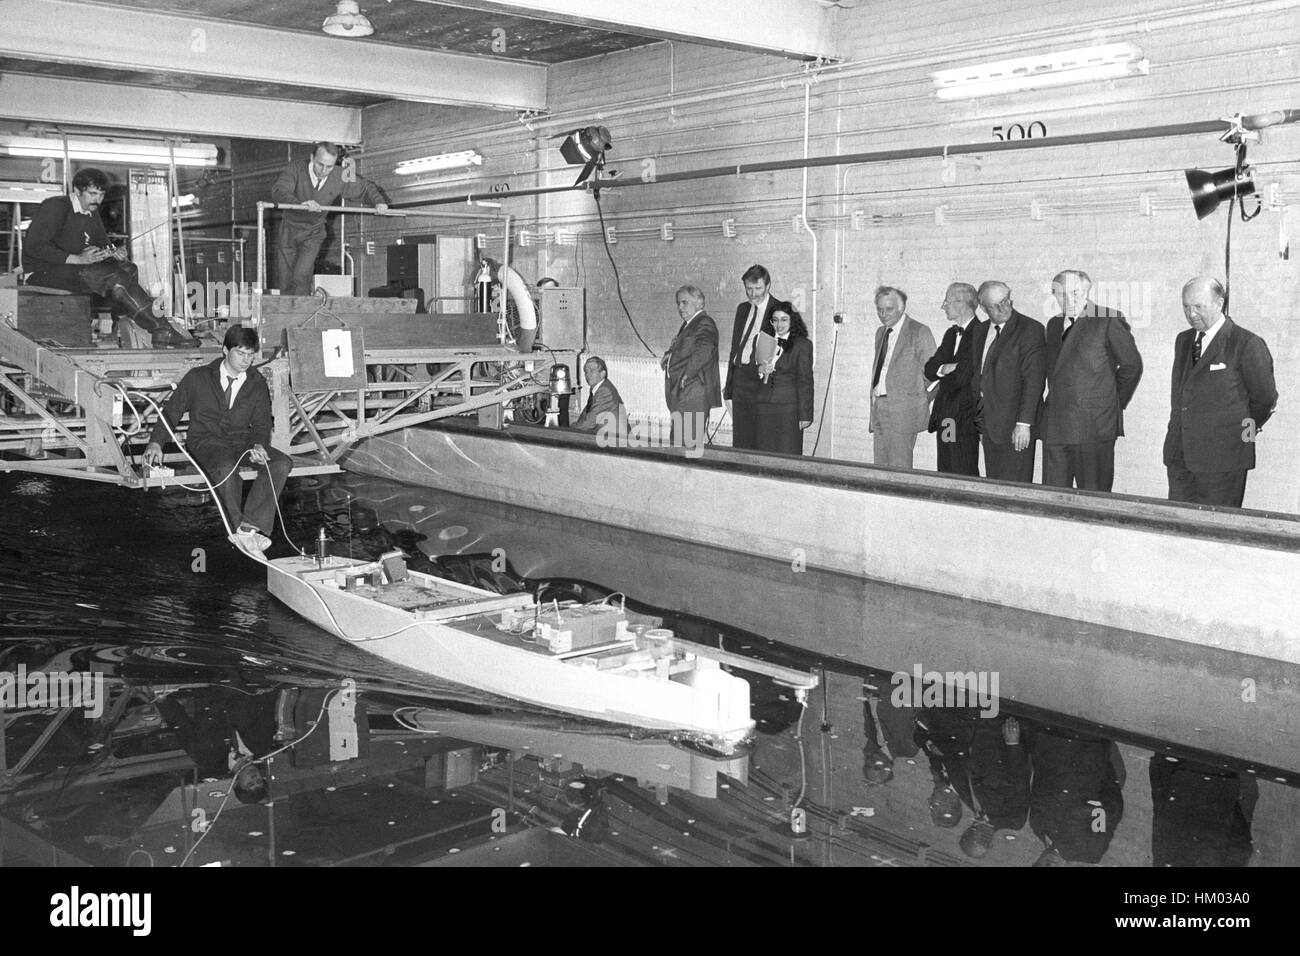 Members of the public inquiry team investigating the Zeebrugge ferry disaster watch computer tests on a model ferry hull at the laboratories of British Maritime Technology in South West London. Inquiry judge Mr Justice Sheen stands at far right. Stock Photo